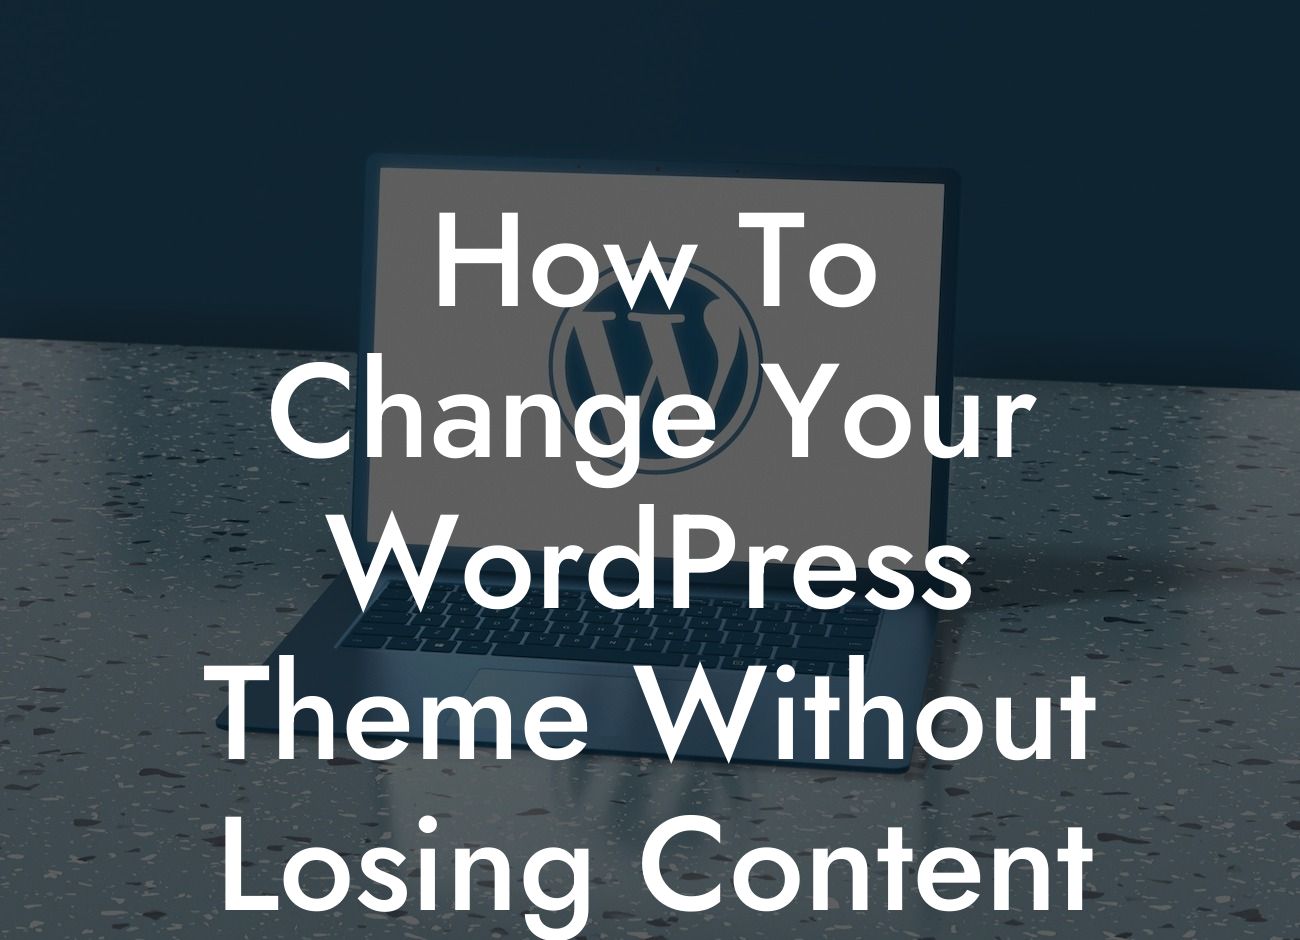 How To Change Your WordPress Theme Without Losing Content